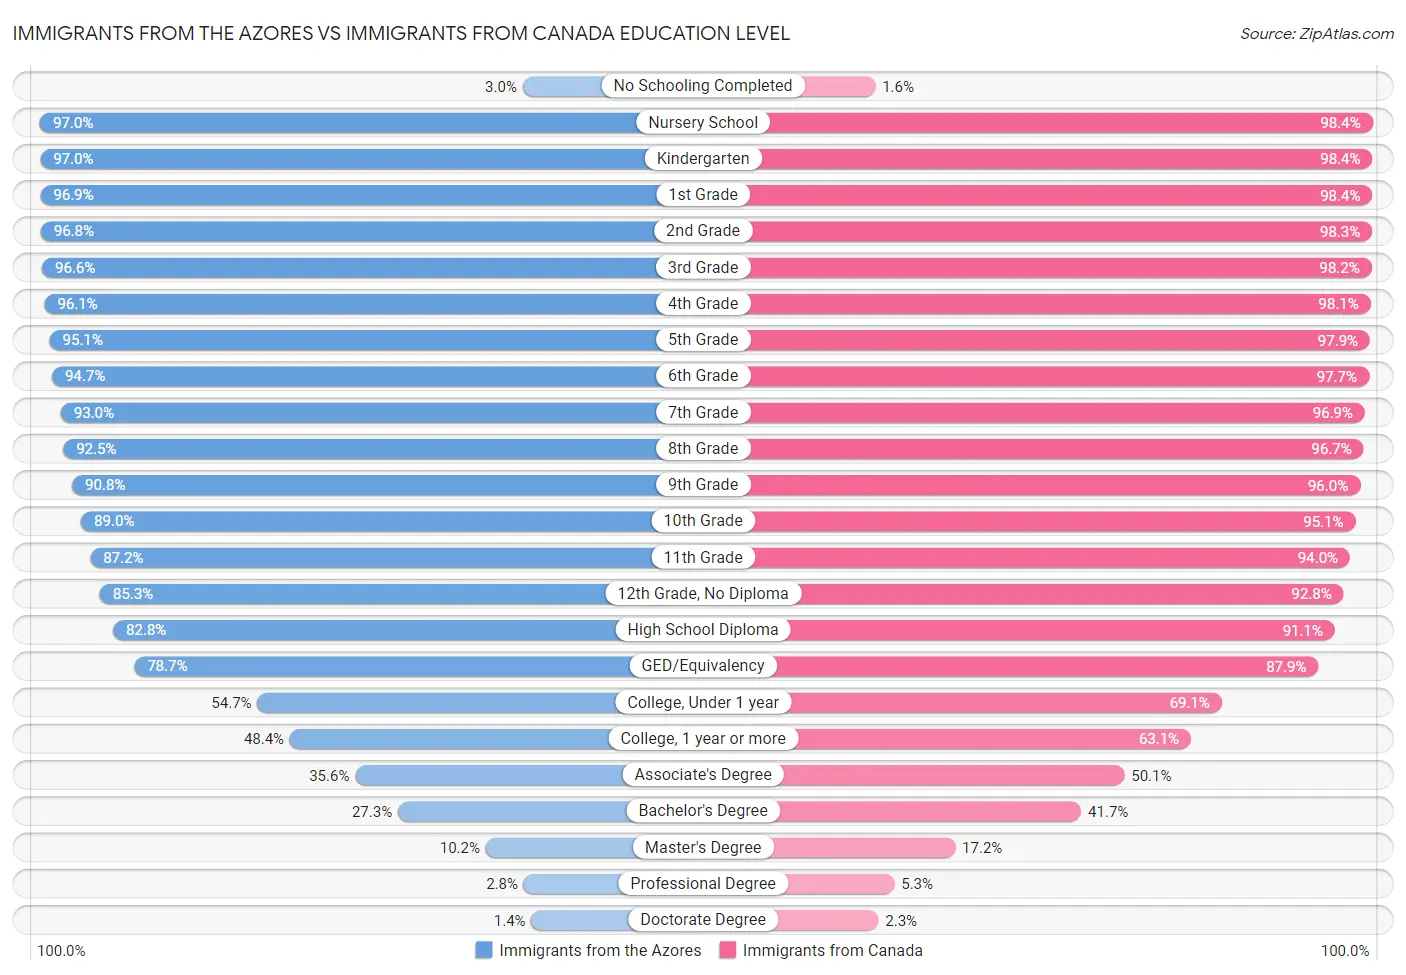 Immigrants from the Azores vs Immigrants from Canada Education Level